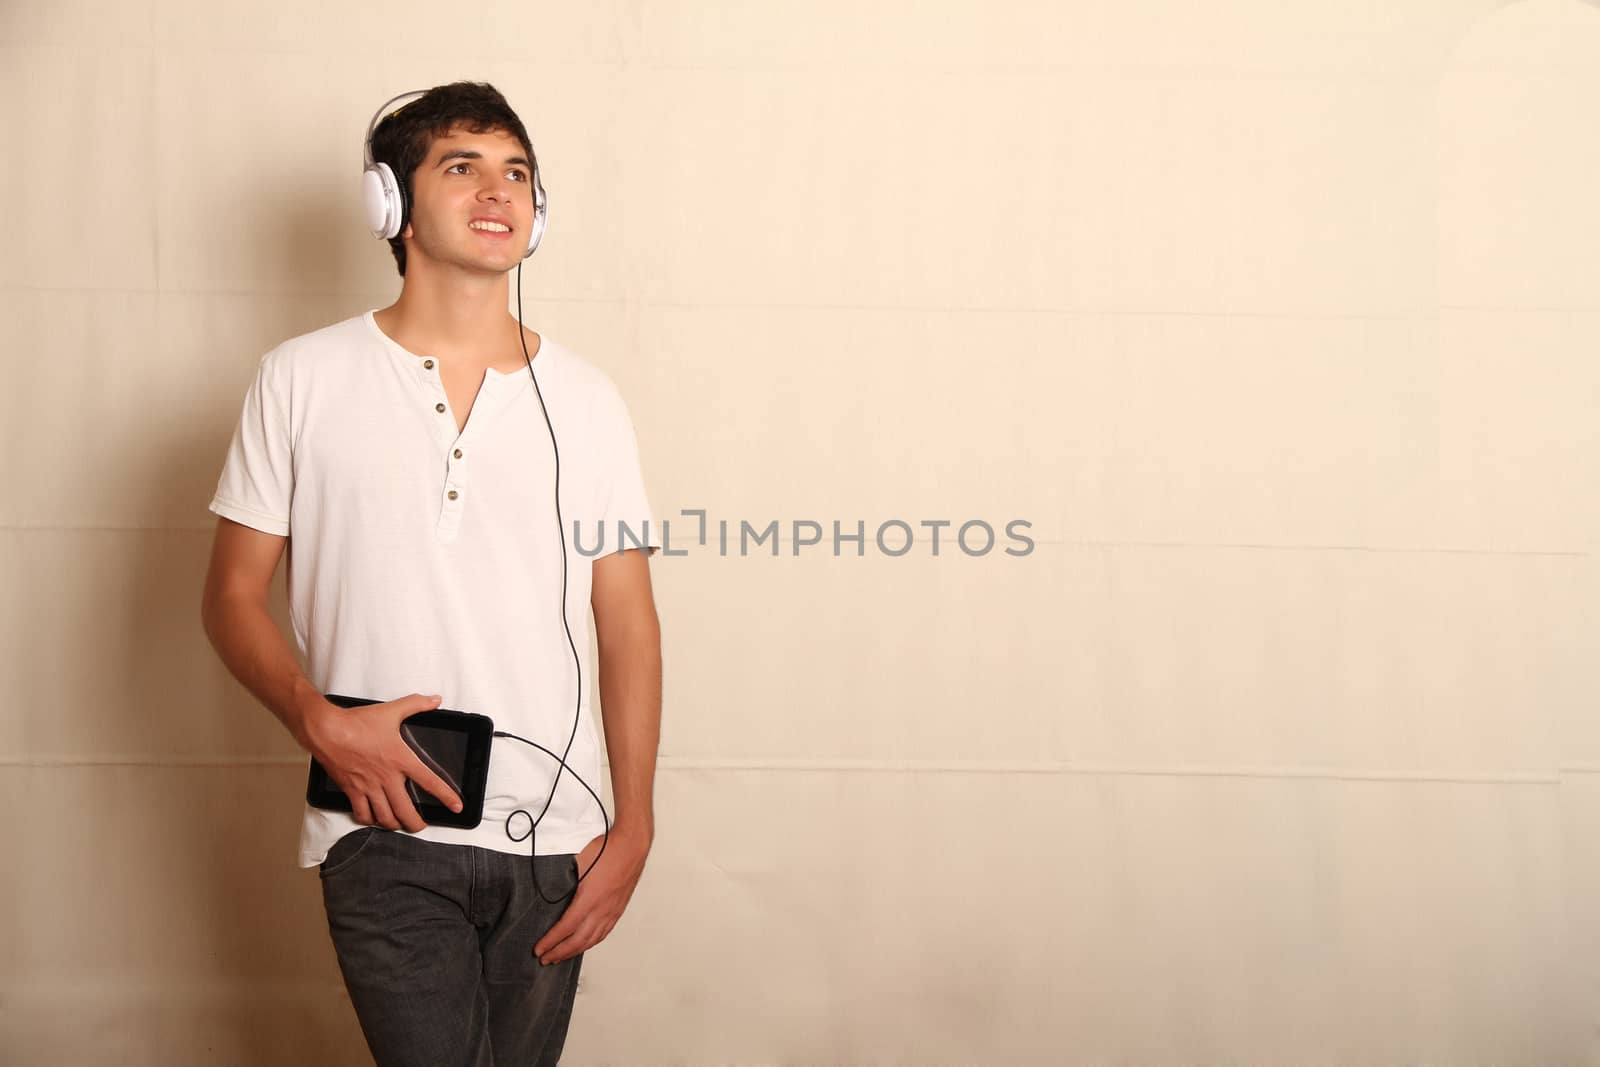 A young, latin man with a Tablet PC and headphones
